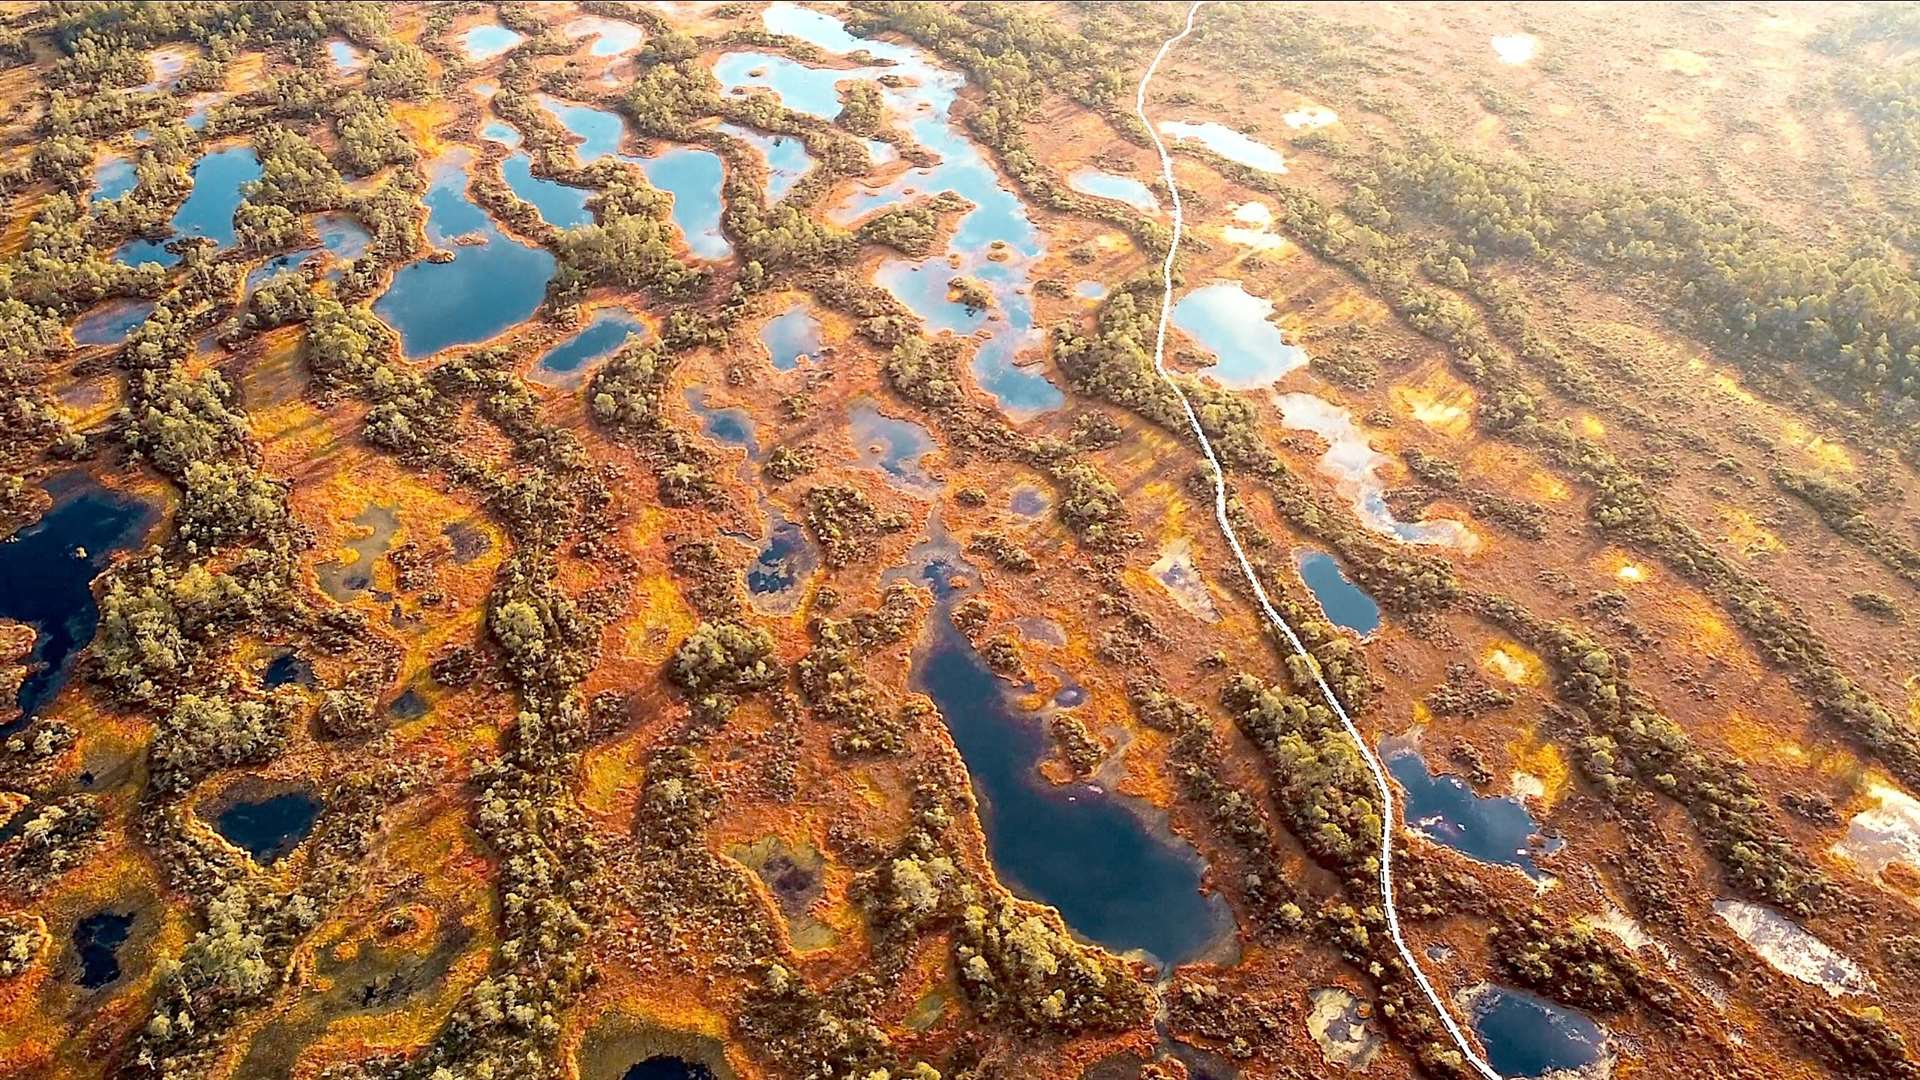 Still image taken from The Dreaming Bog. The filmaker says the peatland appears to look like a "gigantic brain" from the air.